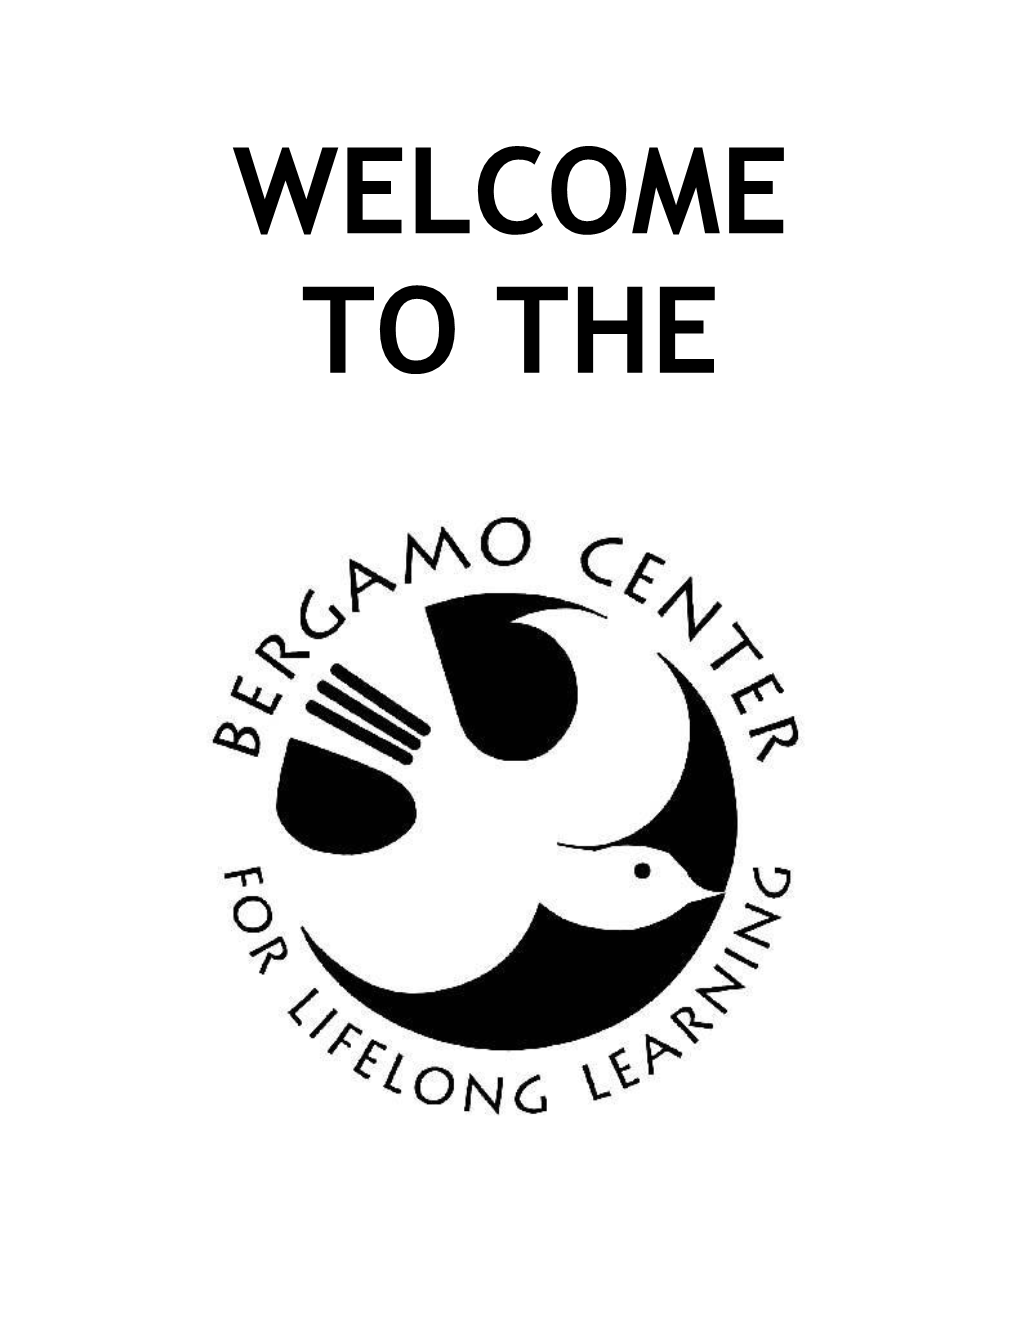 Welcome to the Bergamo Center for Lifelong Learning